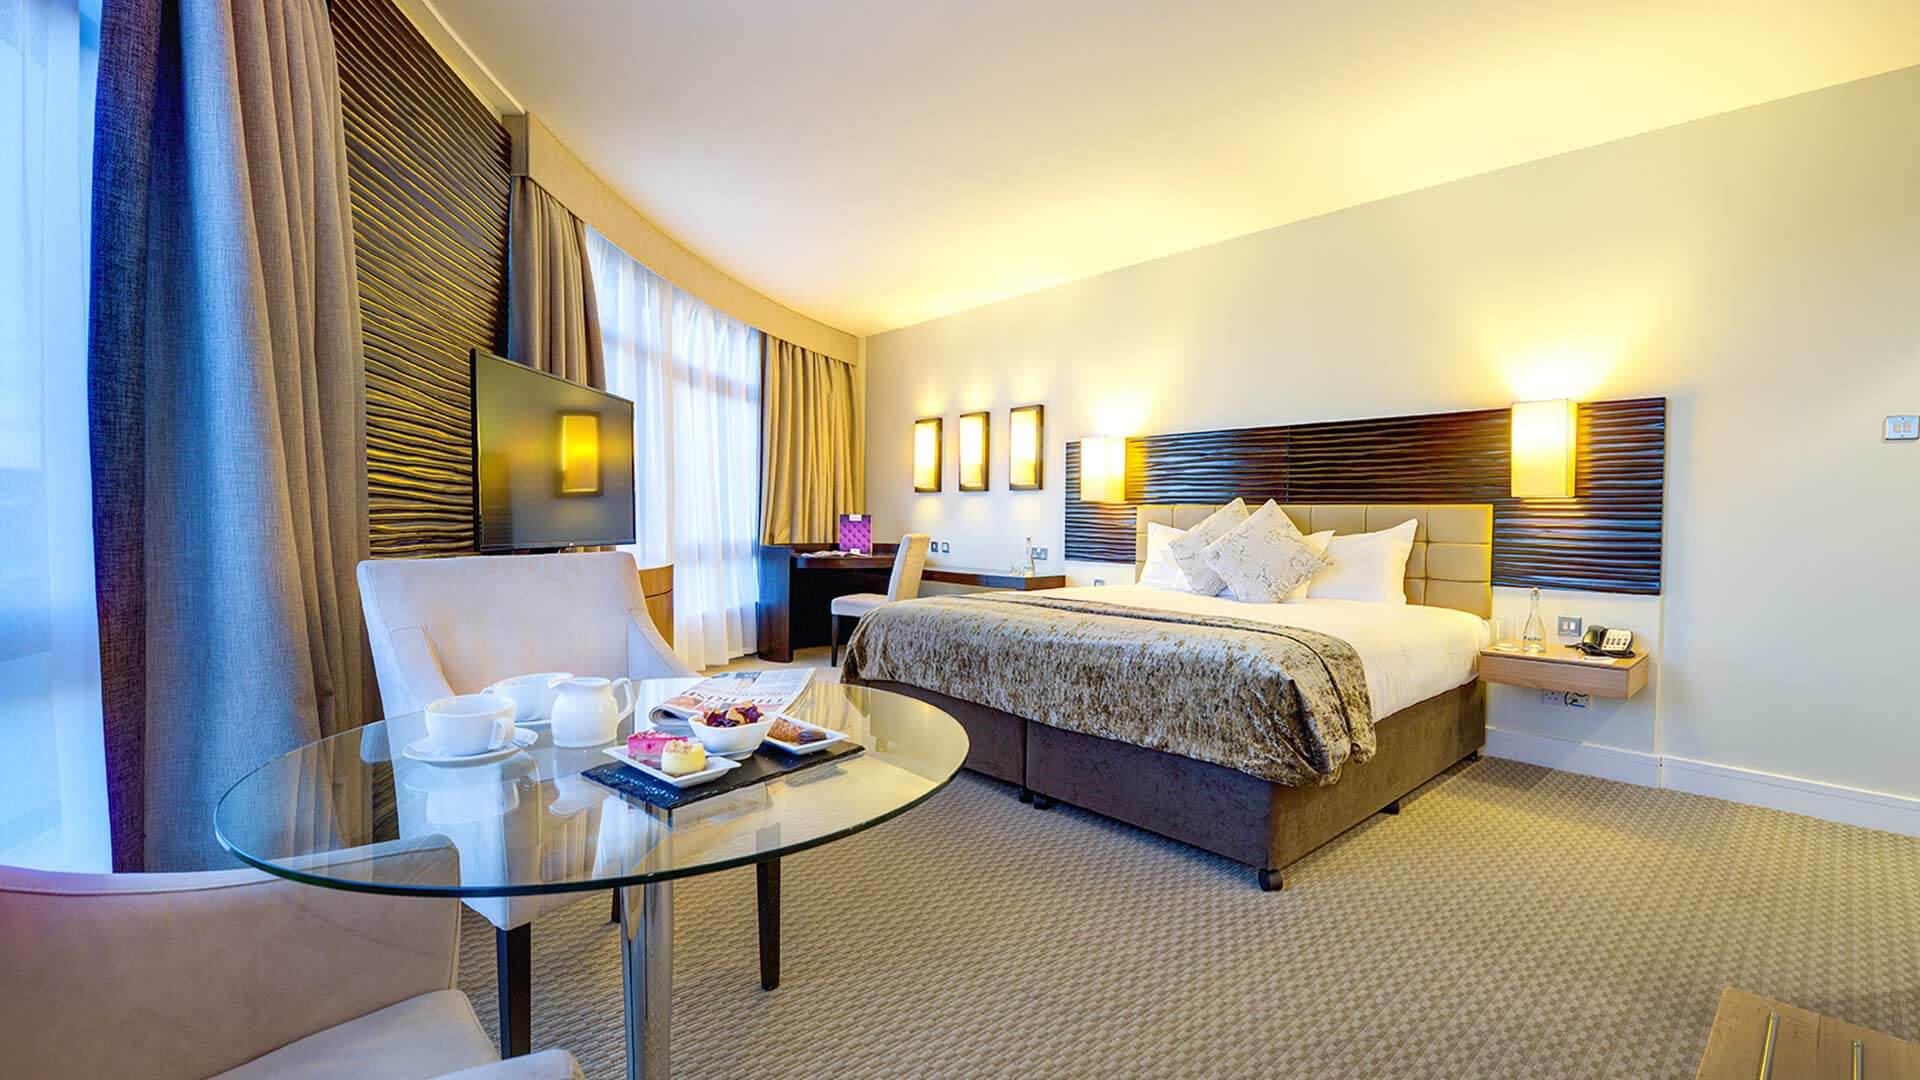 Deluxe Room at Cork International Hotel with king size bed, hot drinks and treats on a table